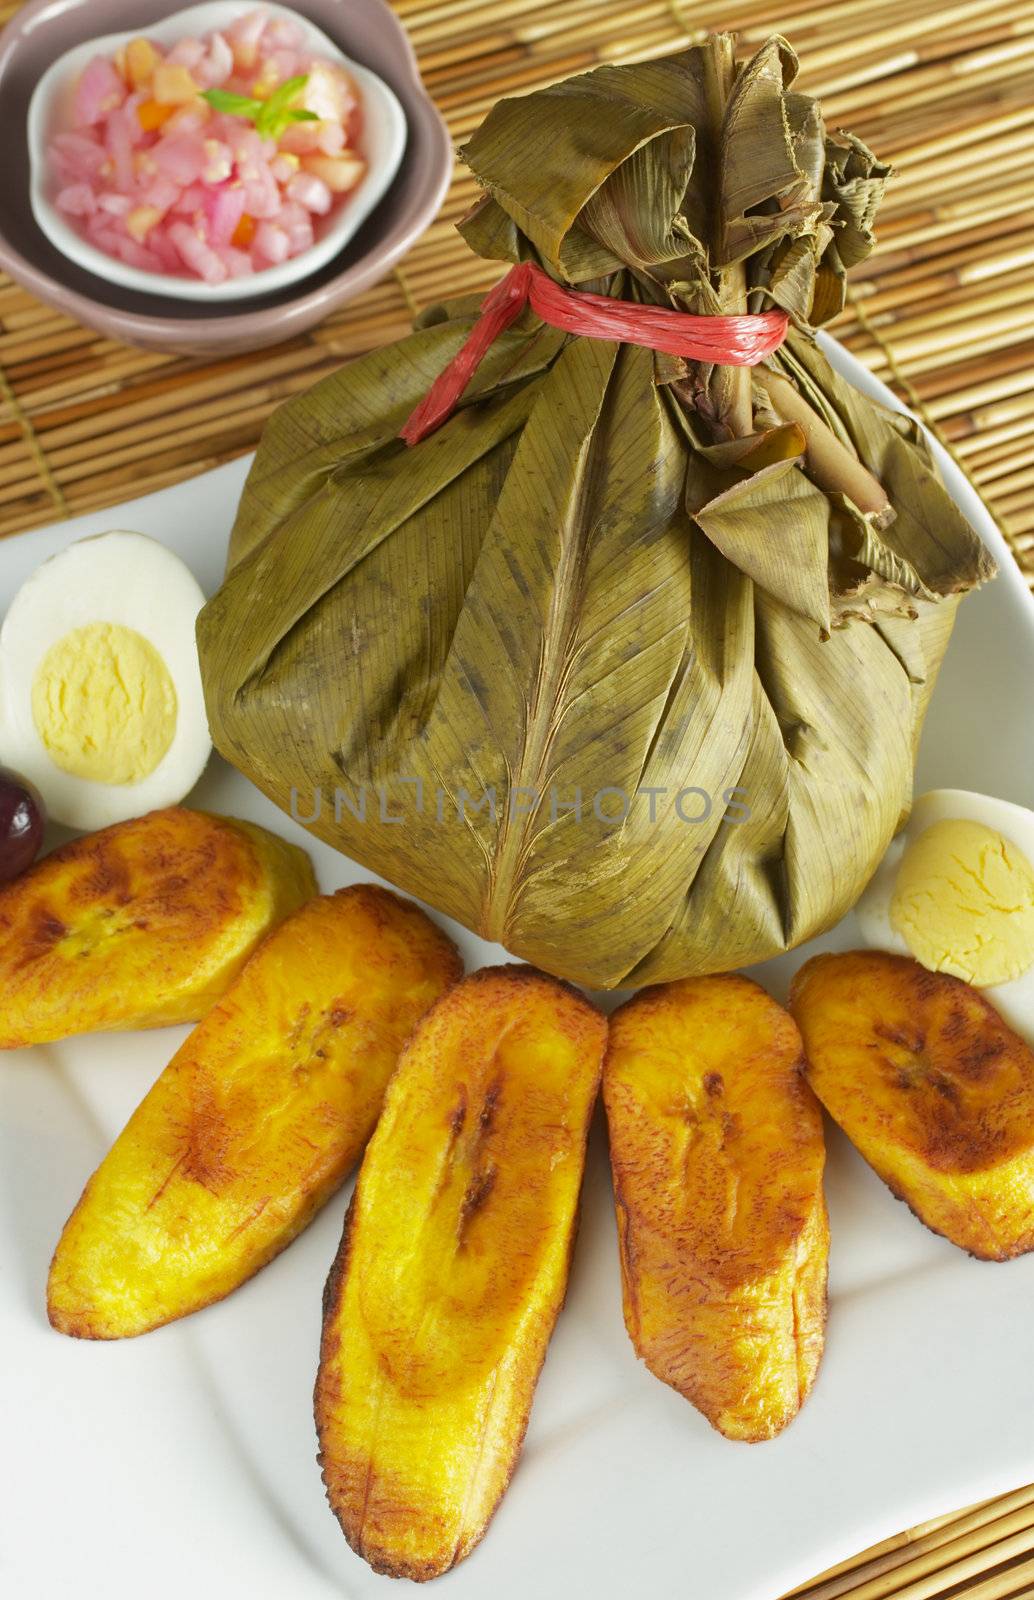 Traditional Peruvian food called Juane from the jungle area. It is a rice dish with meat and eggs covered by bijao leaves and served with fried plantains, eggs and olives (Selective Focus, Focus on the juane)